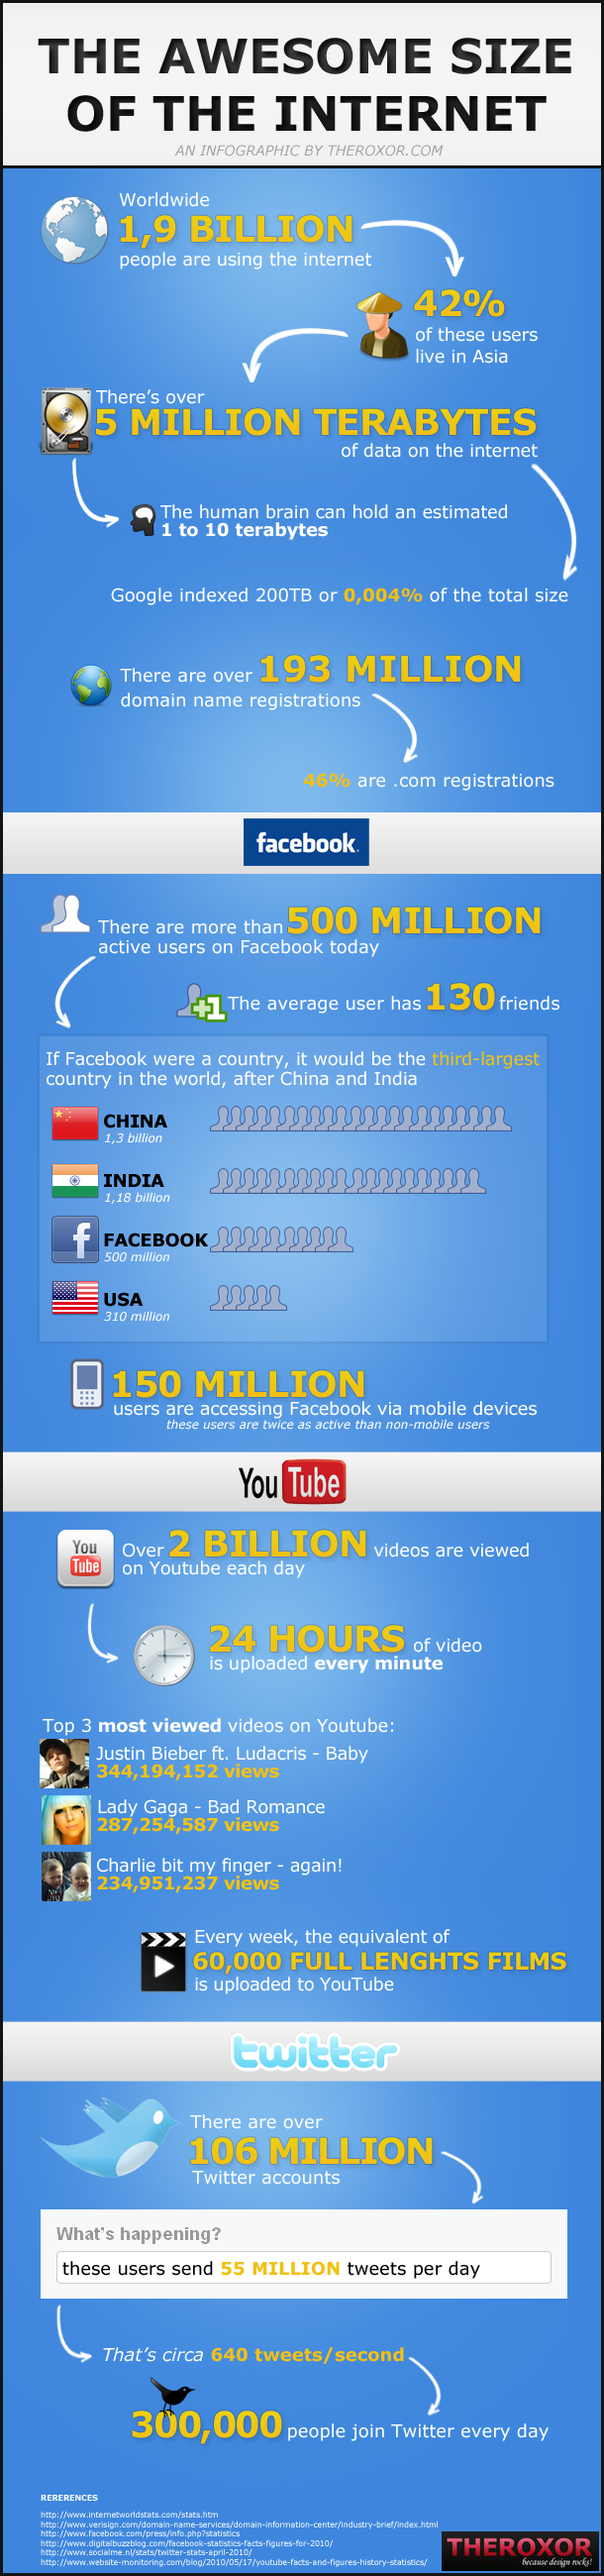 Infographie : L'incroyable taille d'Internet